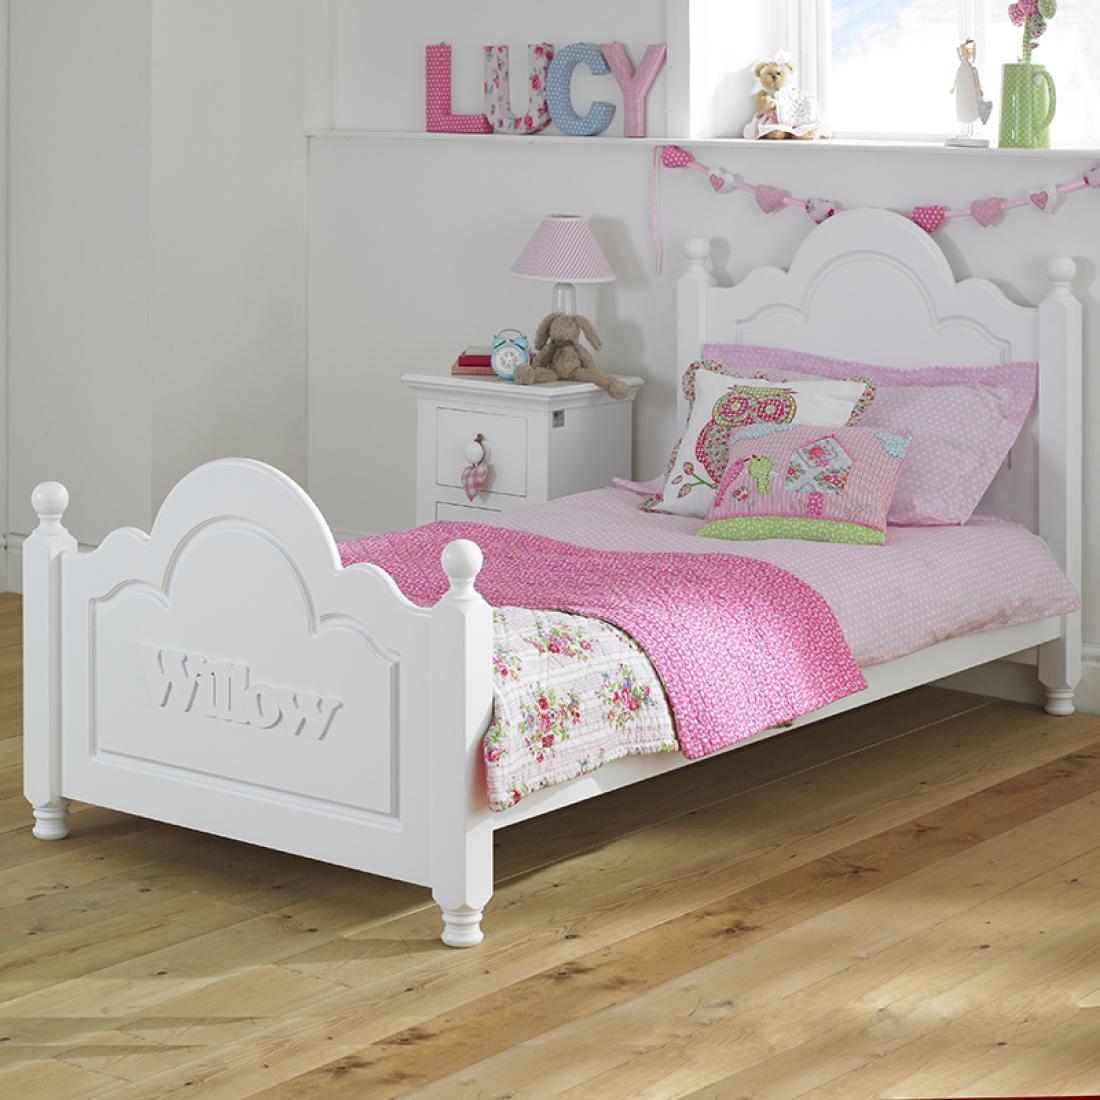 lucy willow bed